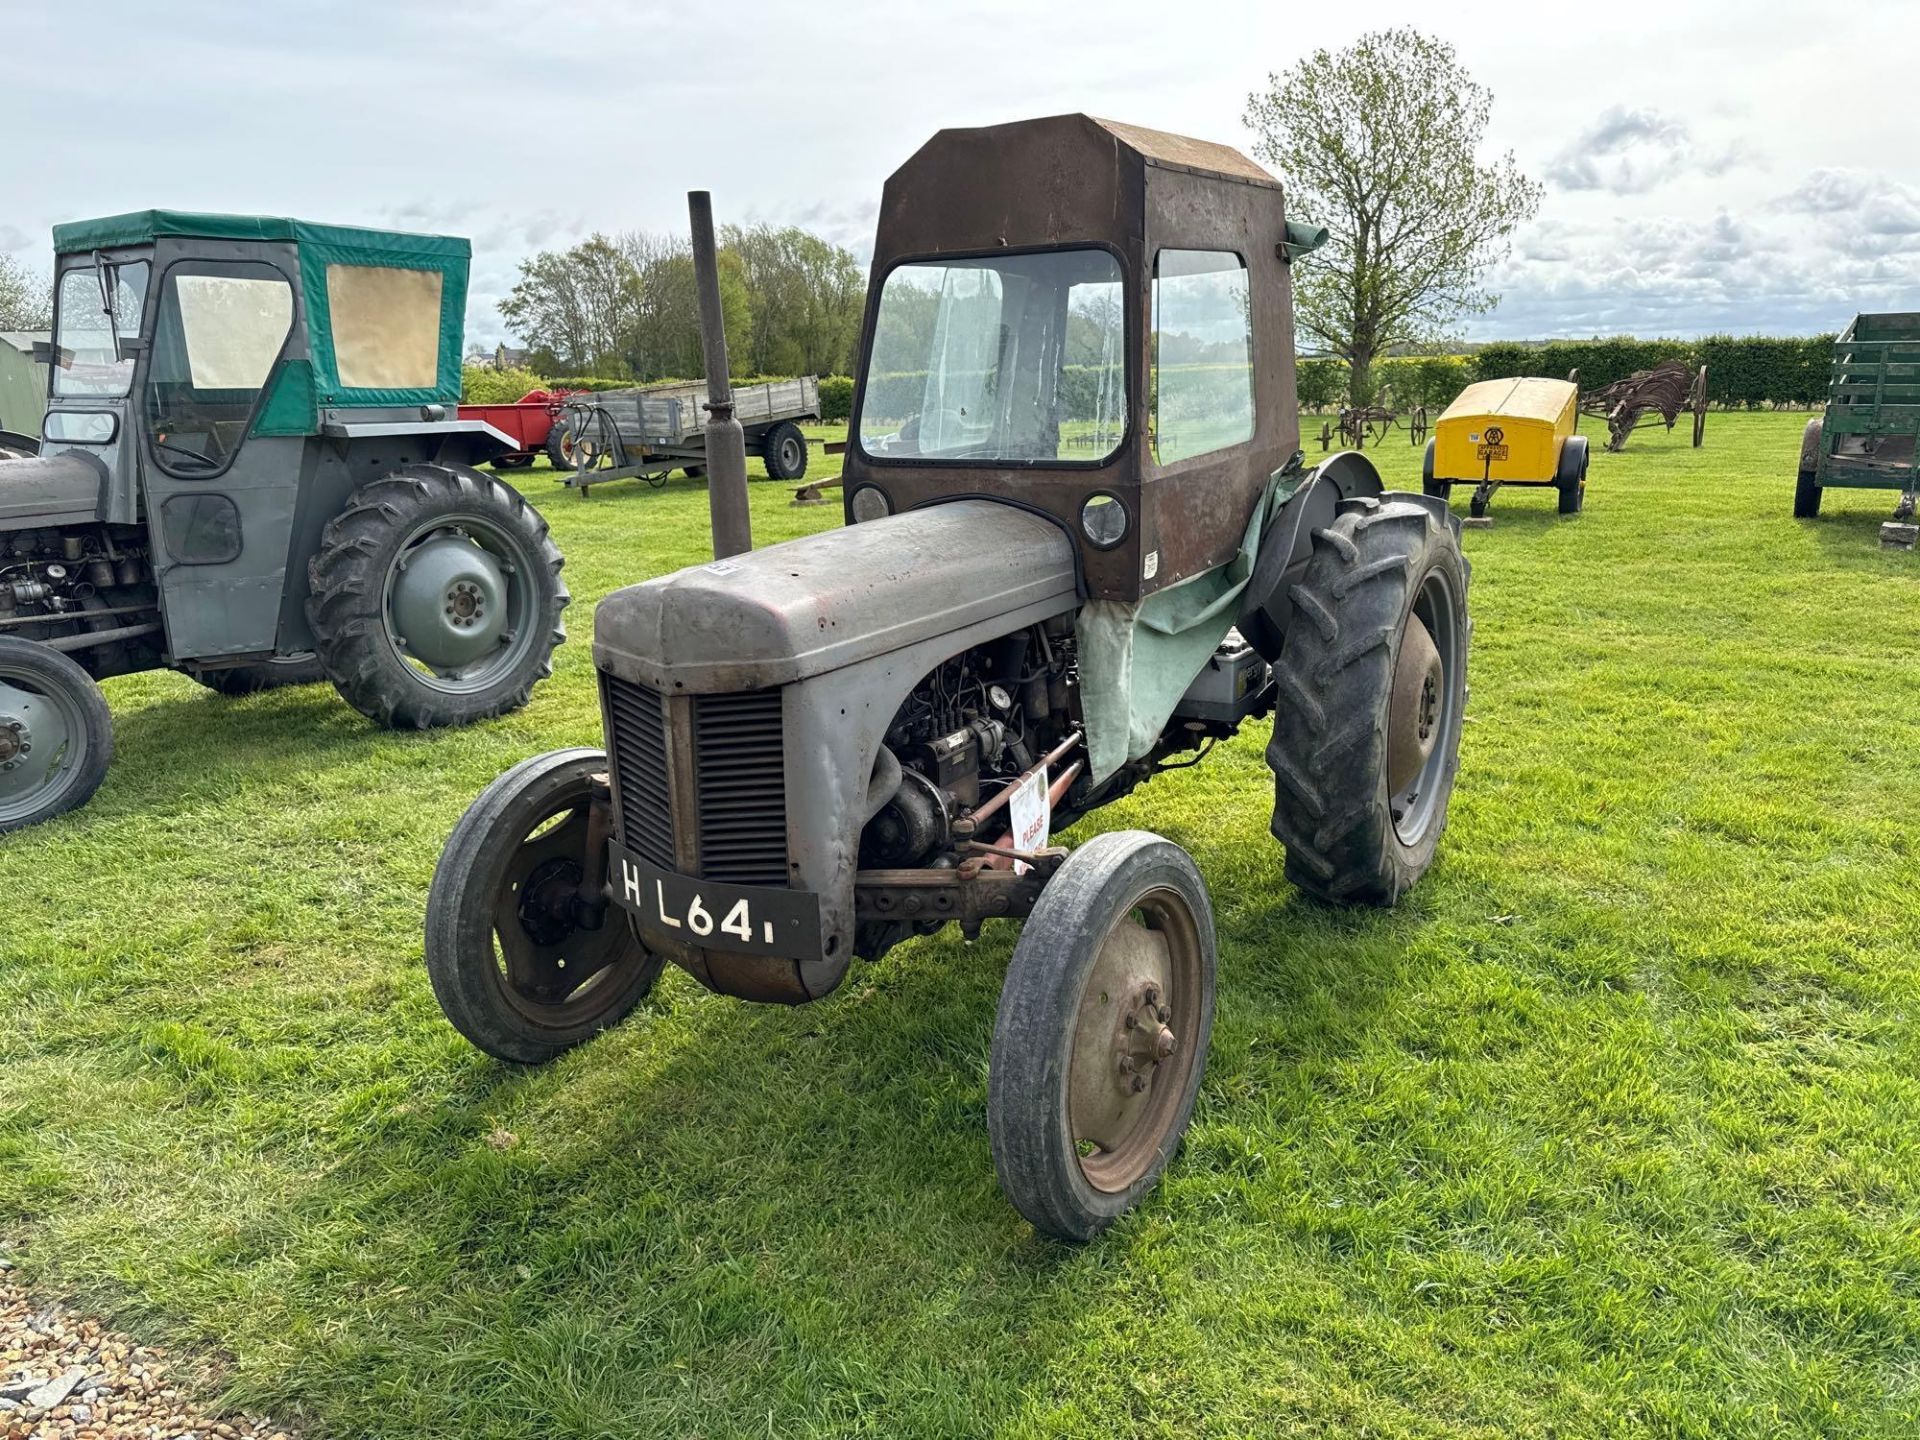 1954 Ferguson TEF 2wd diesel tractor with Clydebuilt cab, rear drawbar assembly and linkage on 11.2/